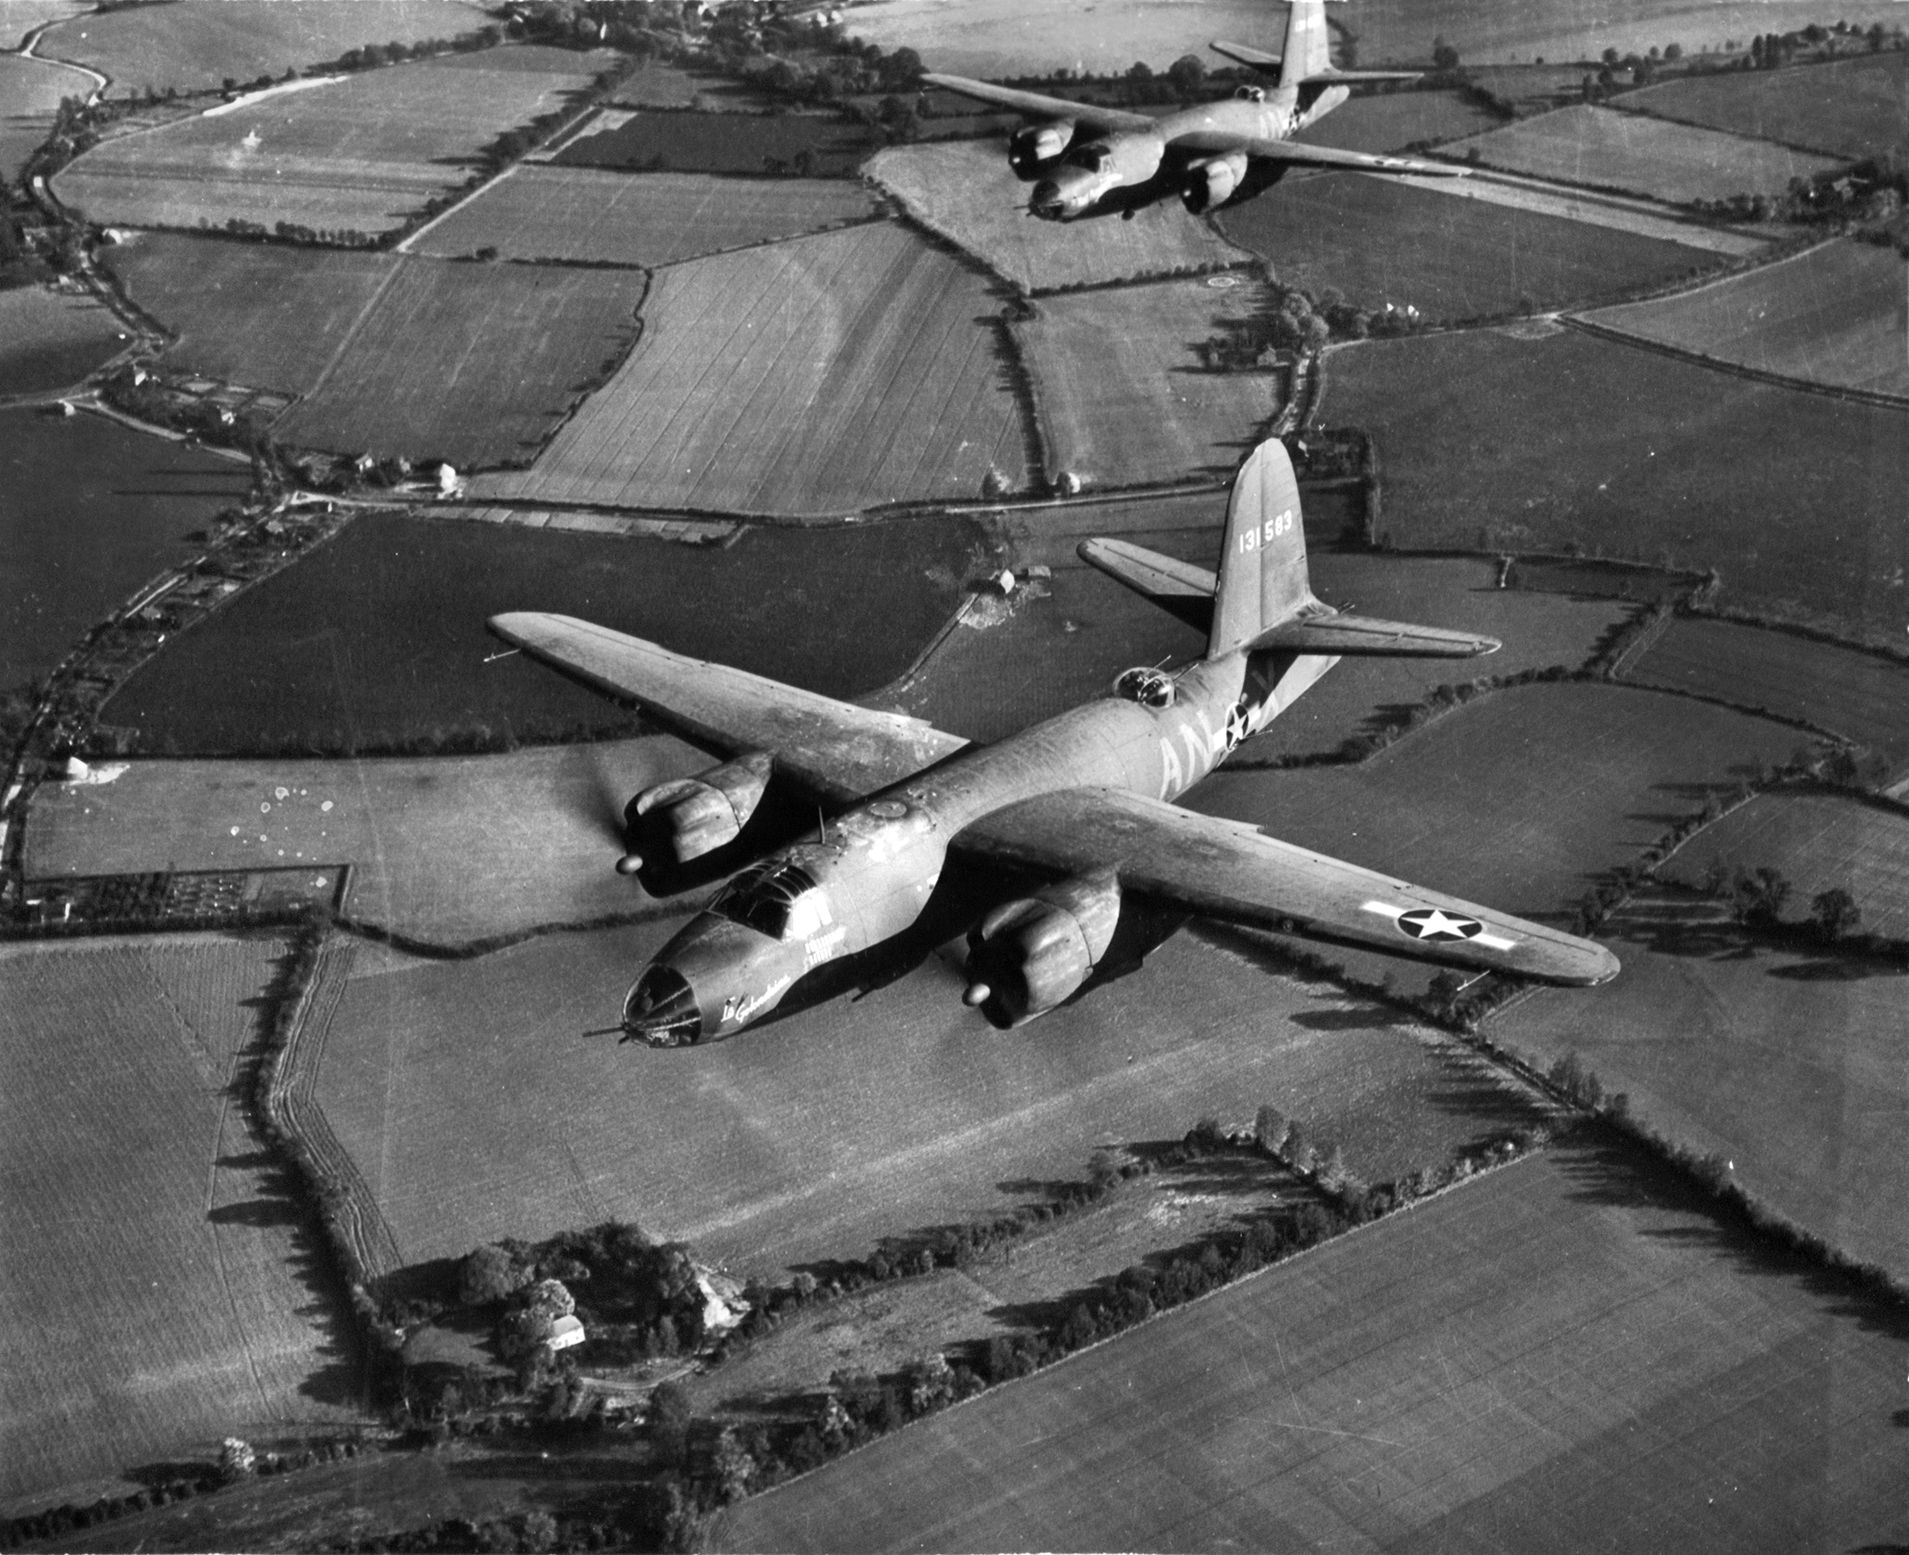 B-26 Mauraders from the 386th Bombardment Group flying over English countryside enroute to a mission over Europe.